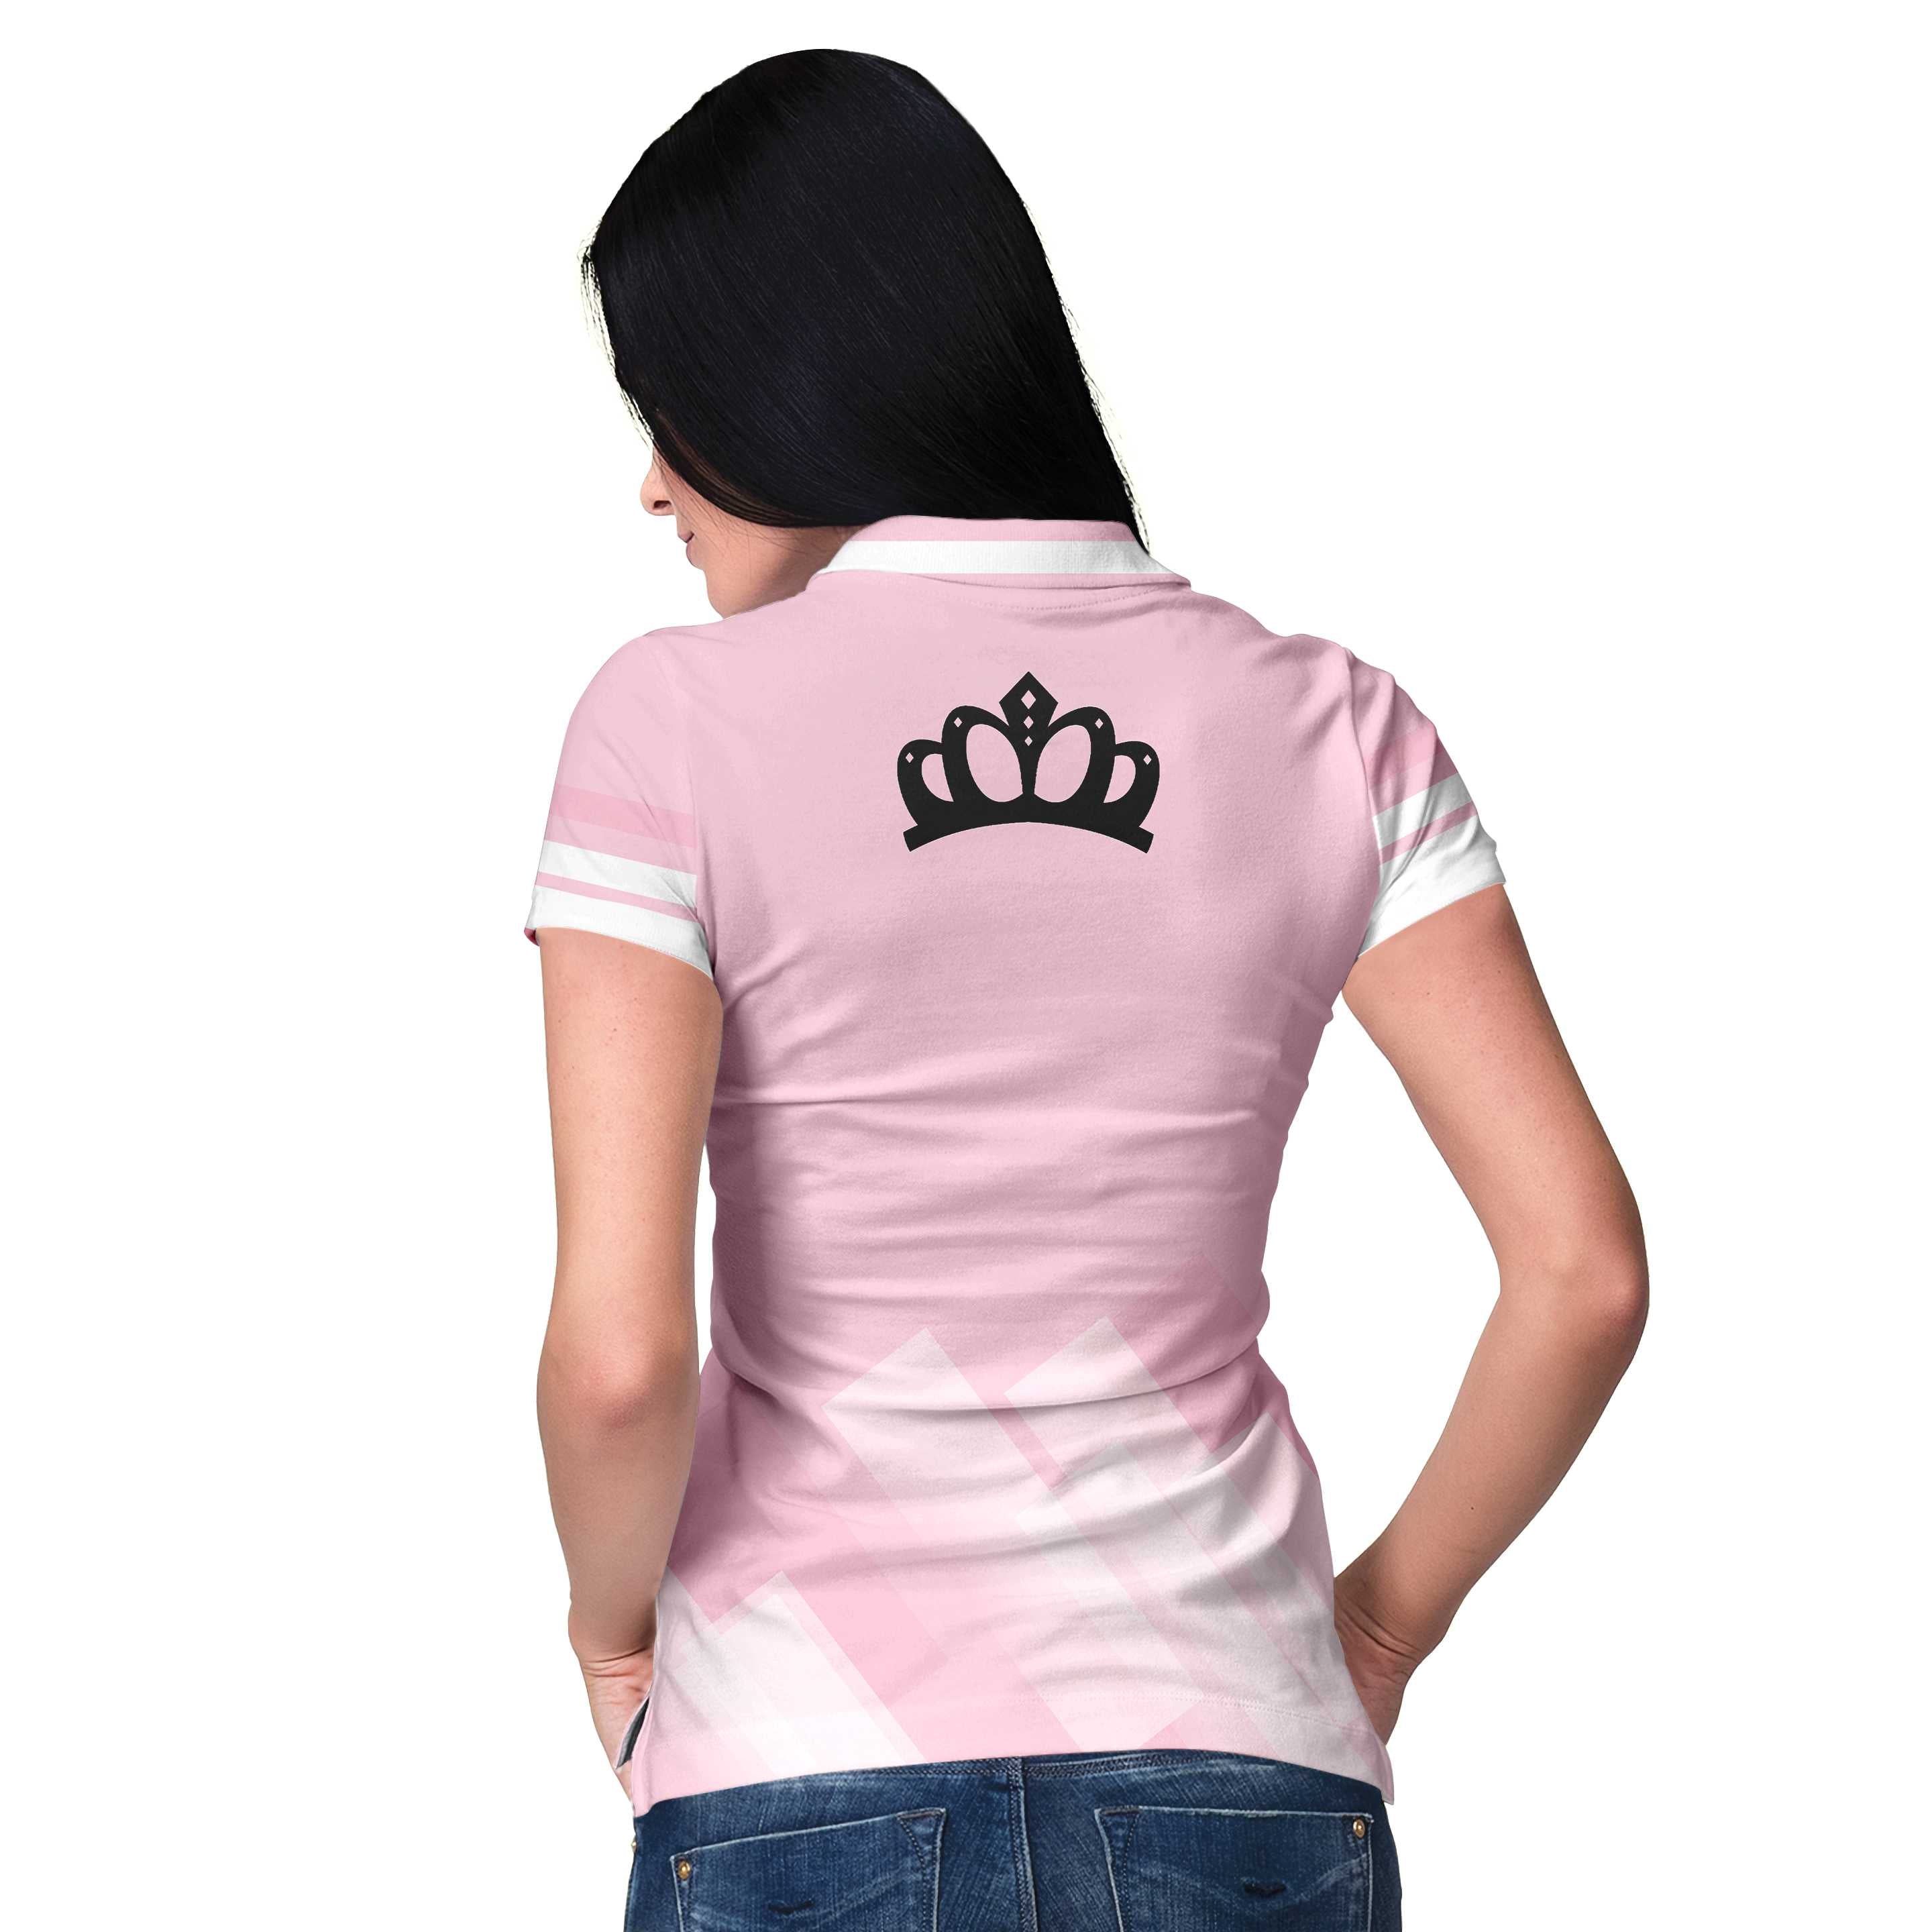 Queen Of The Court Pink Short Sleeve Women Polo Shirt/ Cool Tennis Shirt For Ladies Coolspod